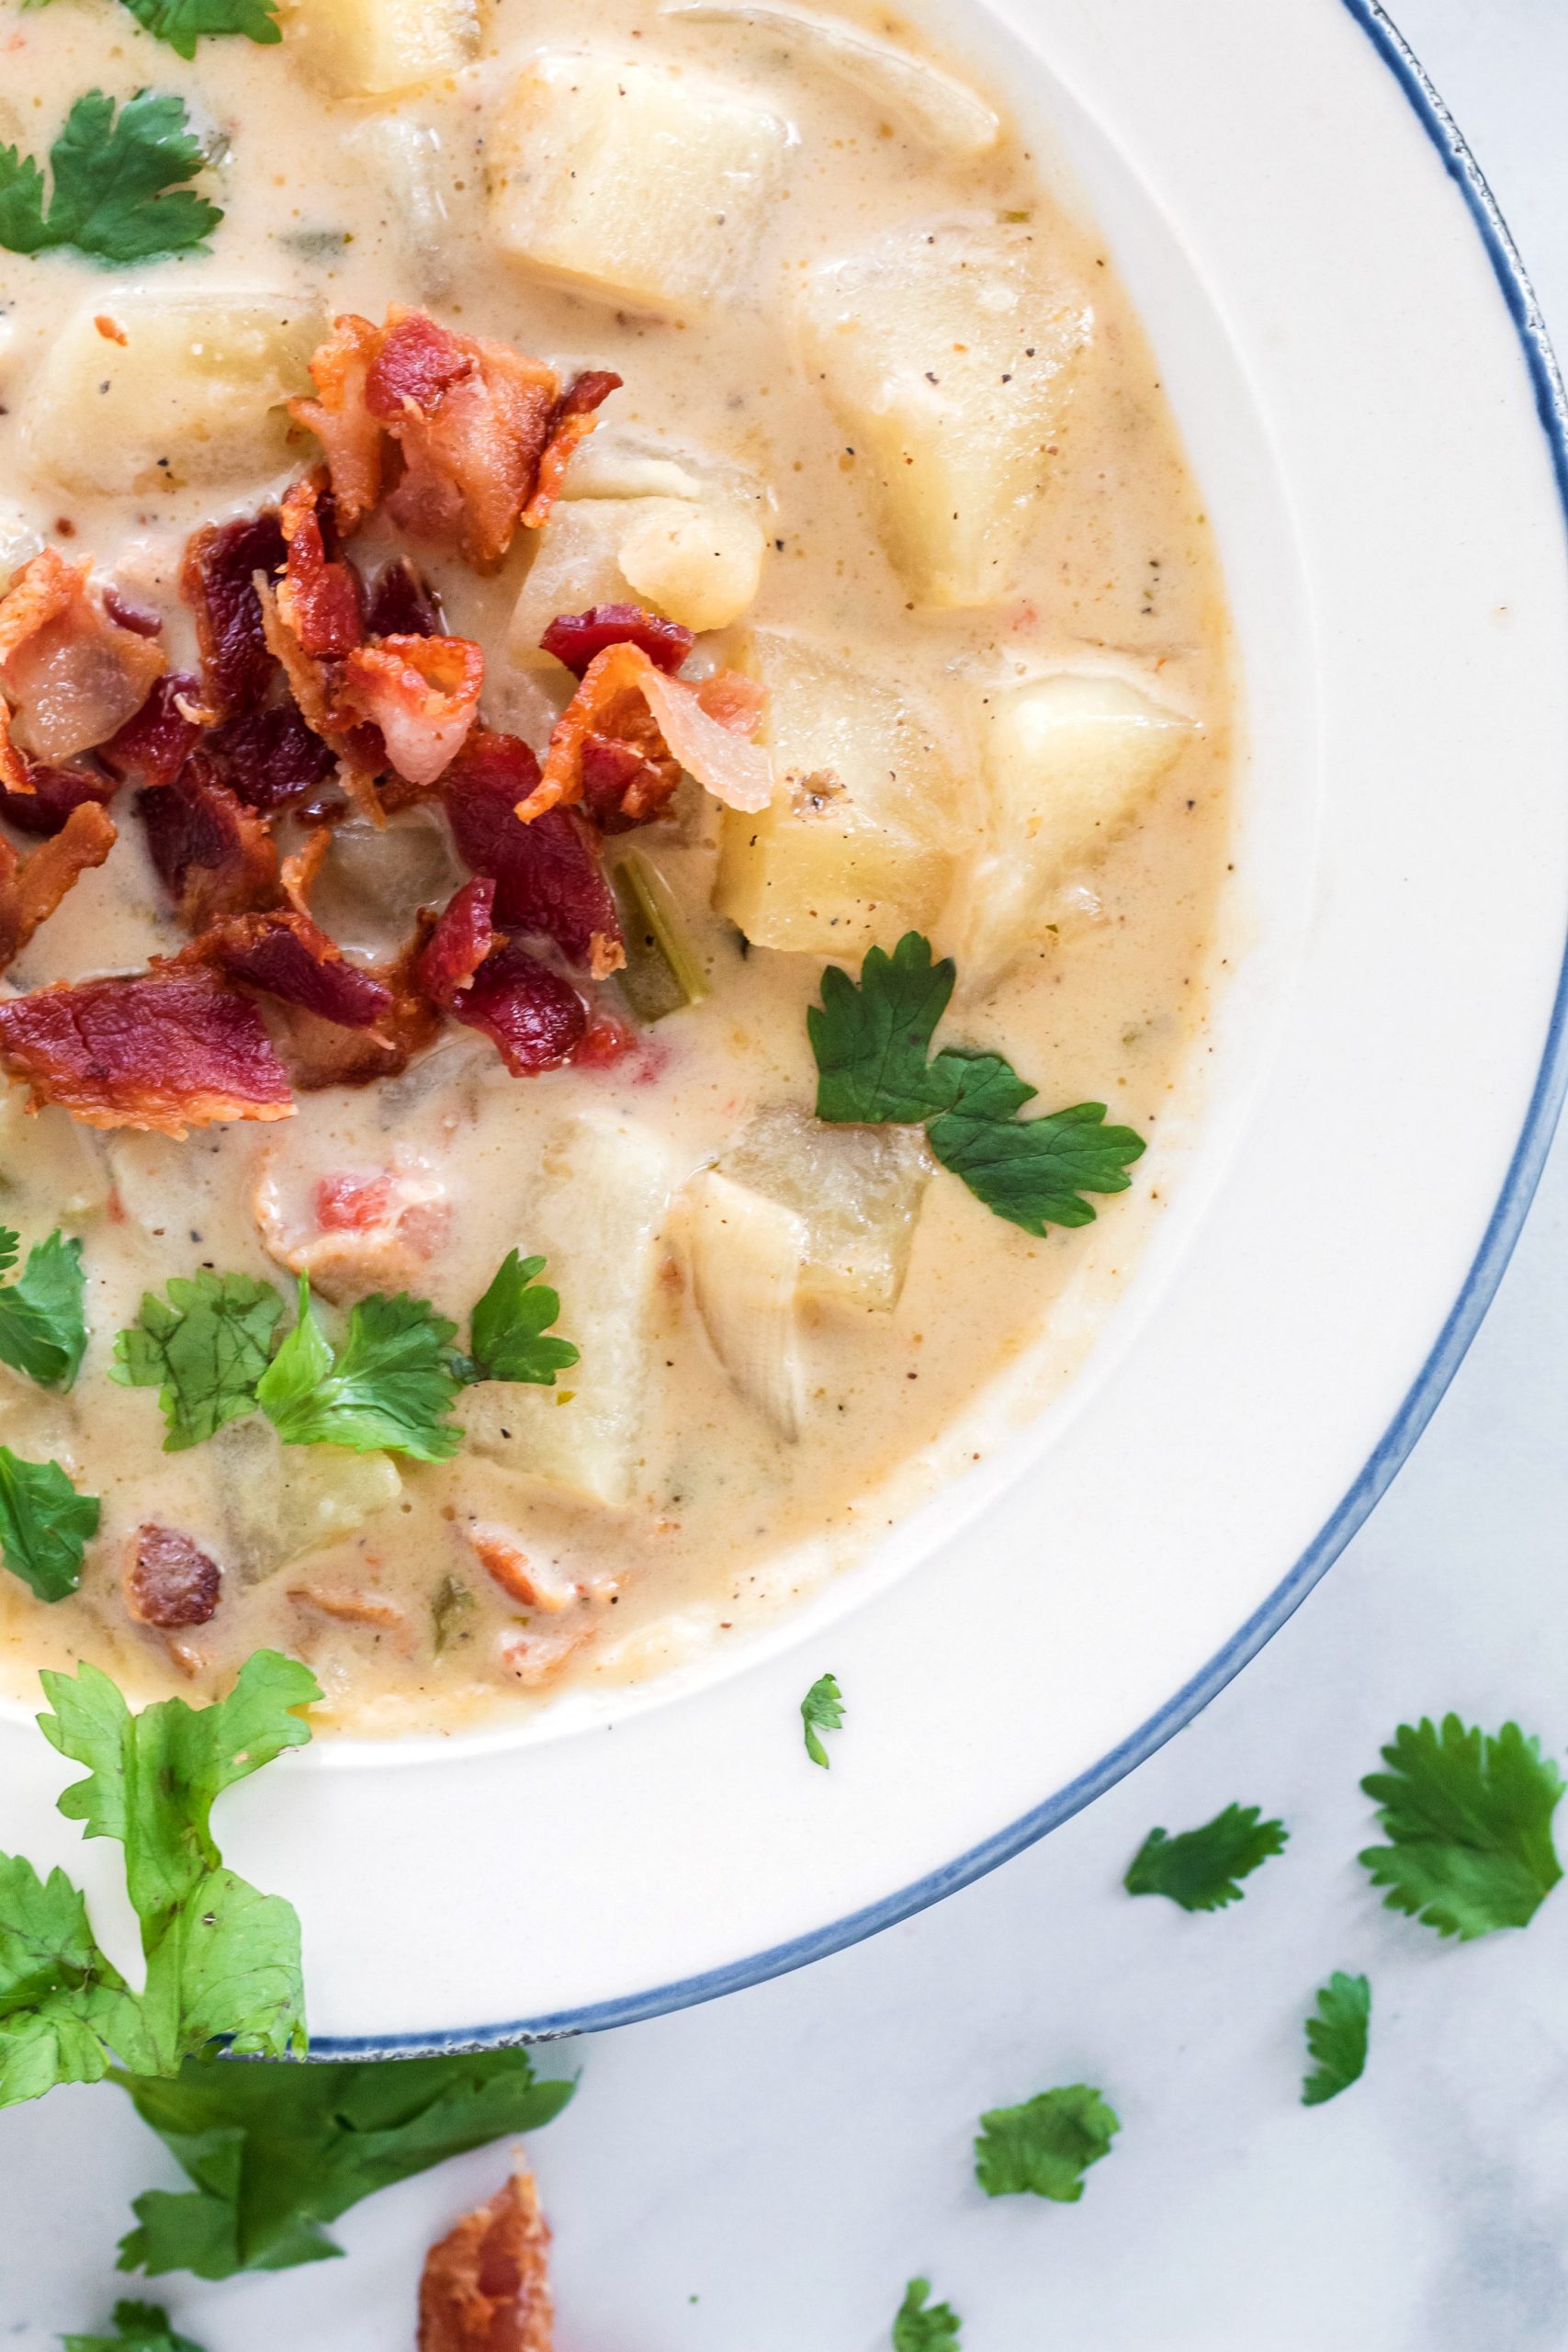 Using cream to make the soup instead of milk makes this Crock Pot Potato Soup unbelievably luscious.